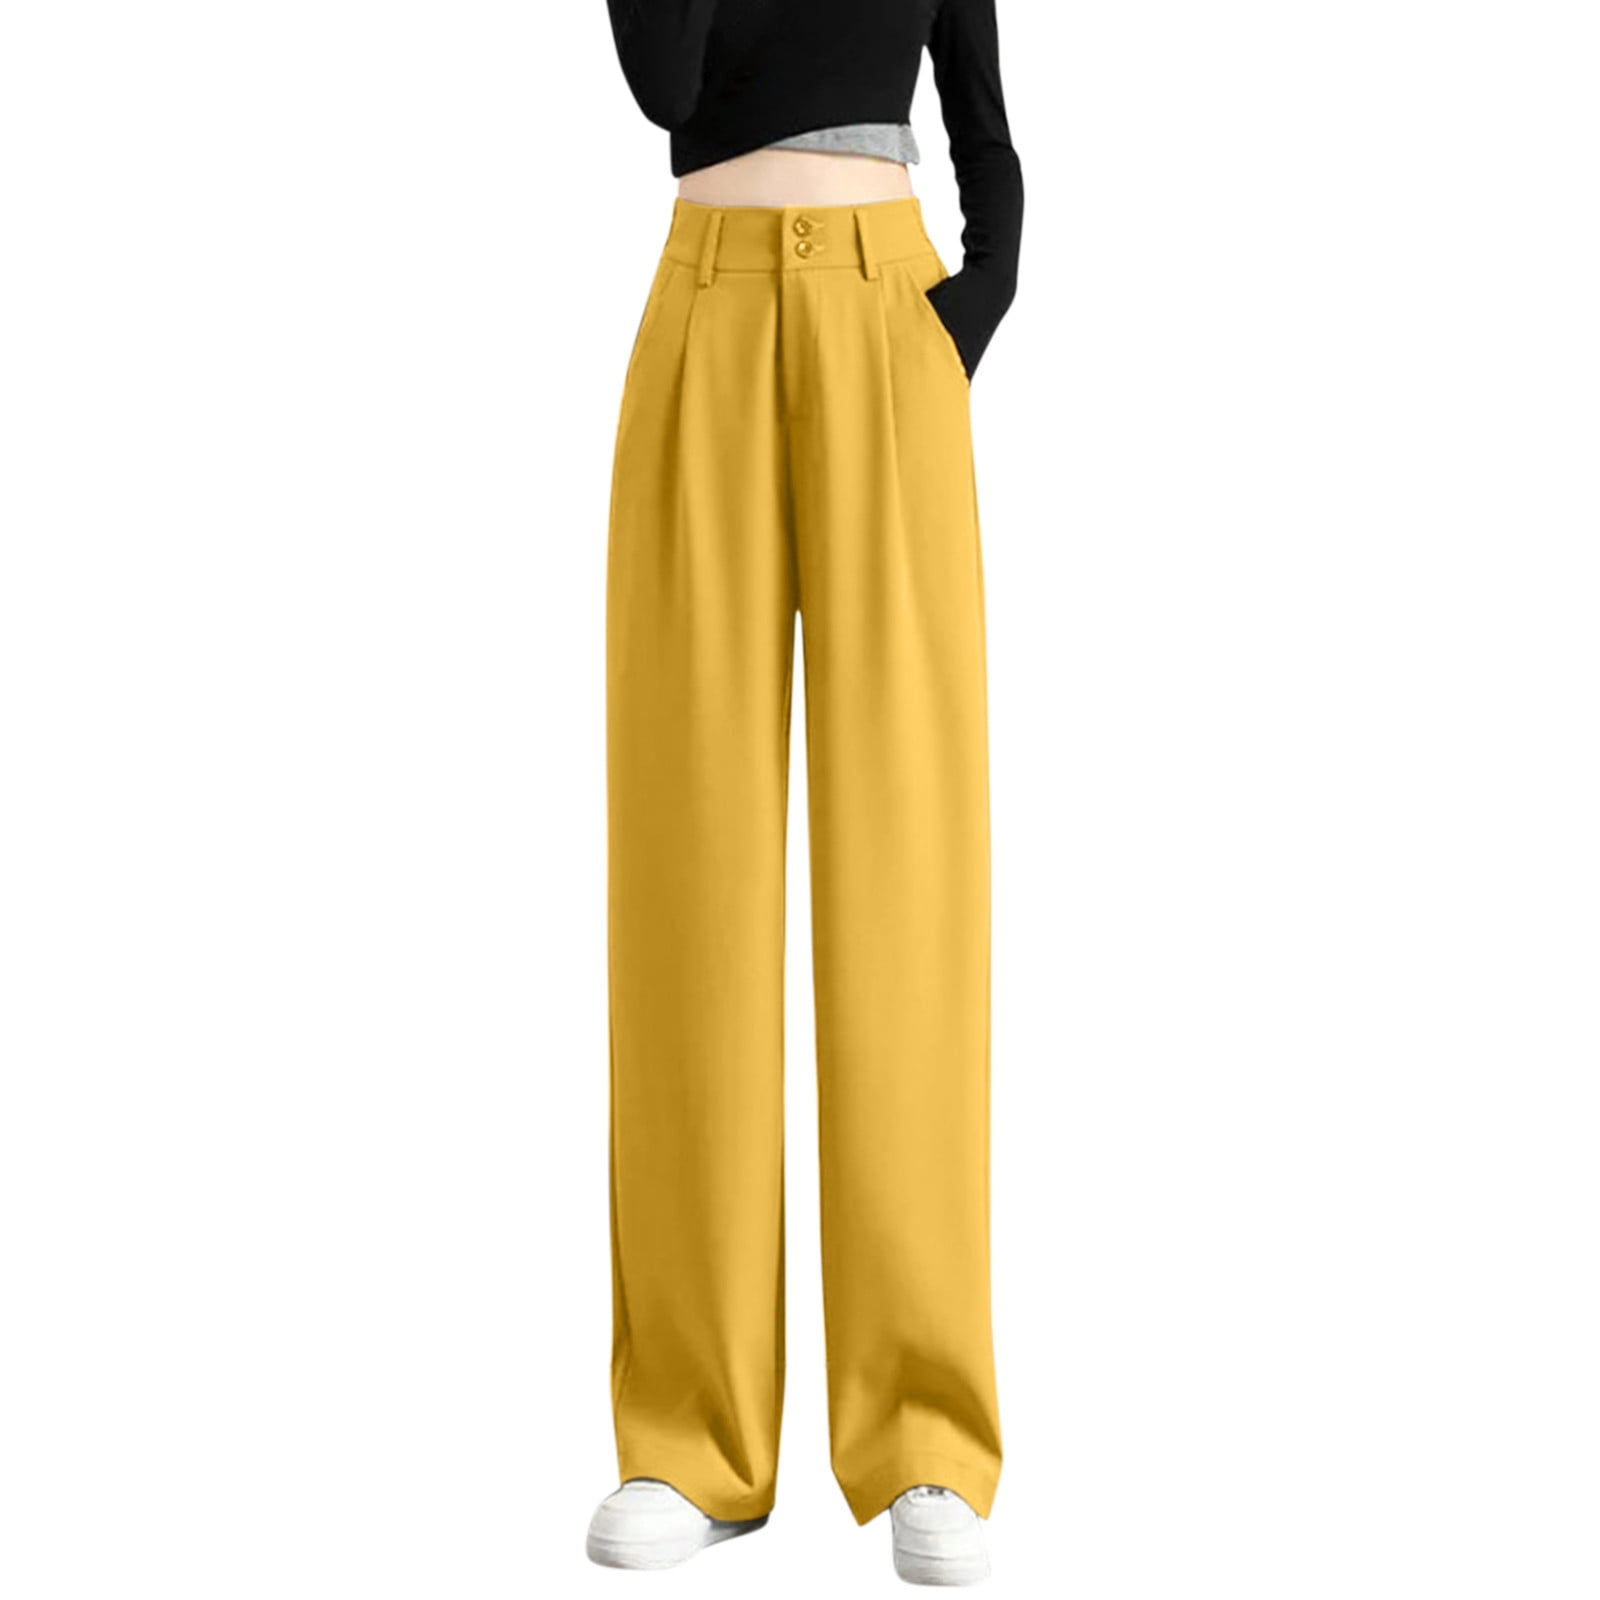 Plain Mustard Women Stretch Stylish Track Pant, Model Name/Number: Twill  Urban at Rs 300/piece in Surat